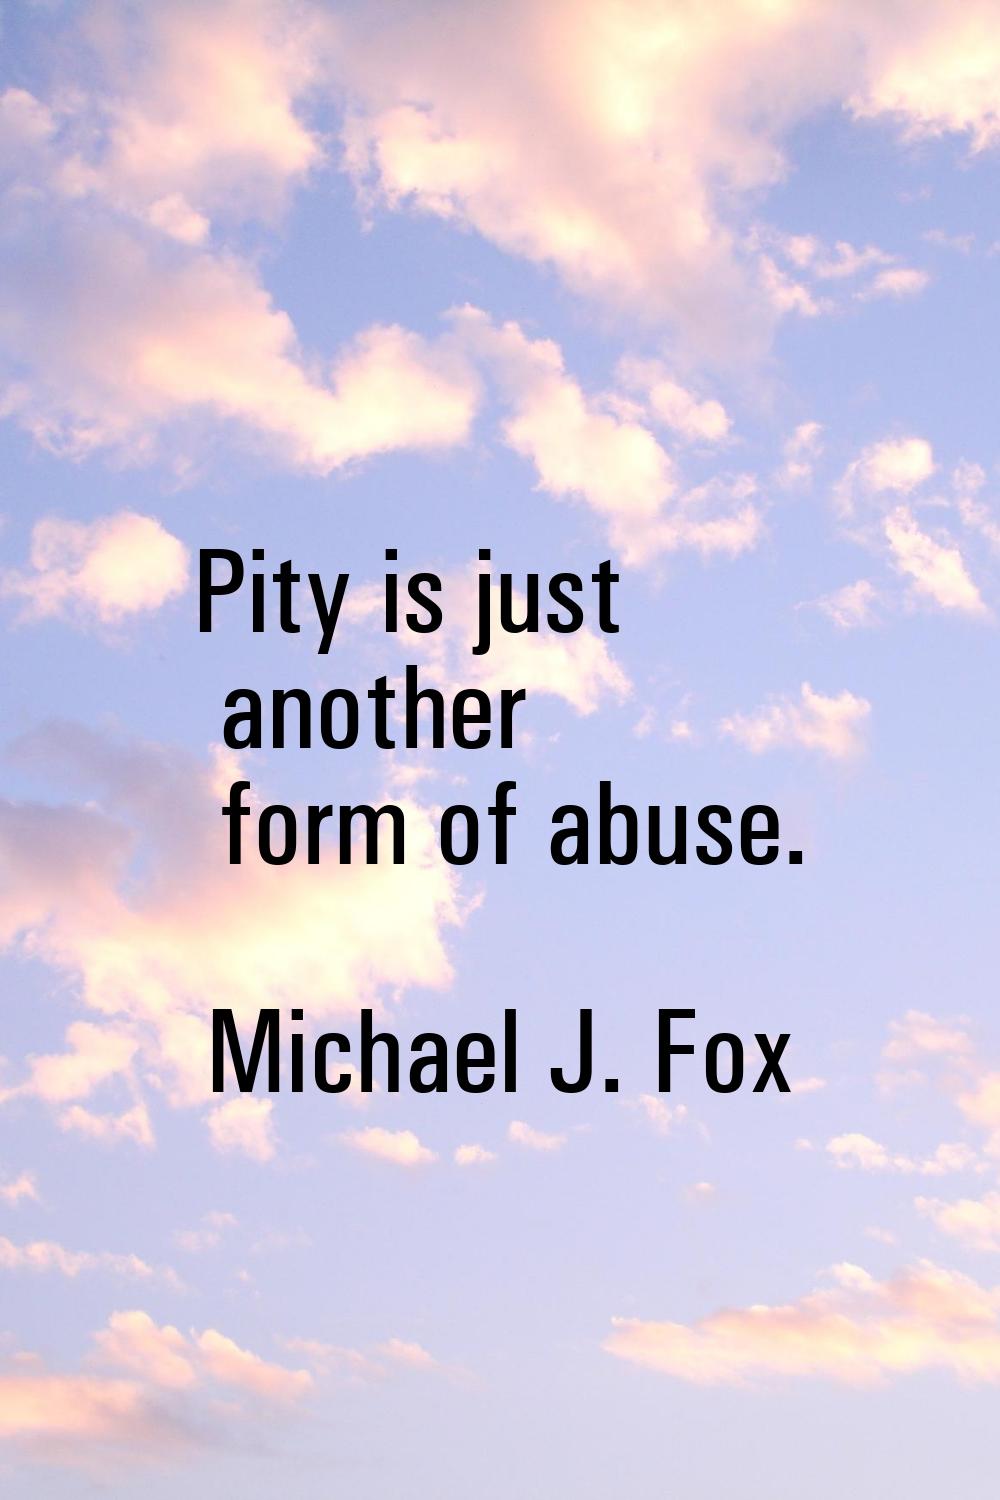 Pity is just another form of abuse.